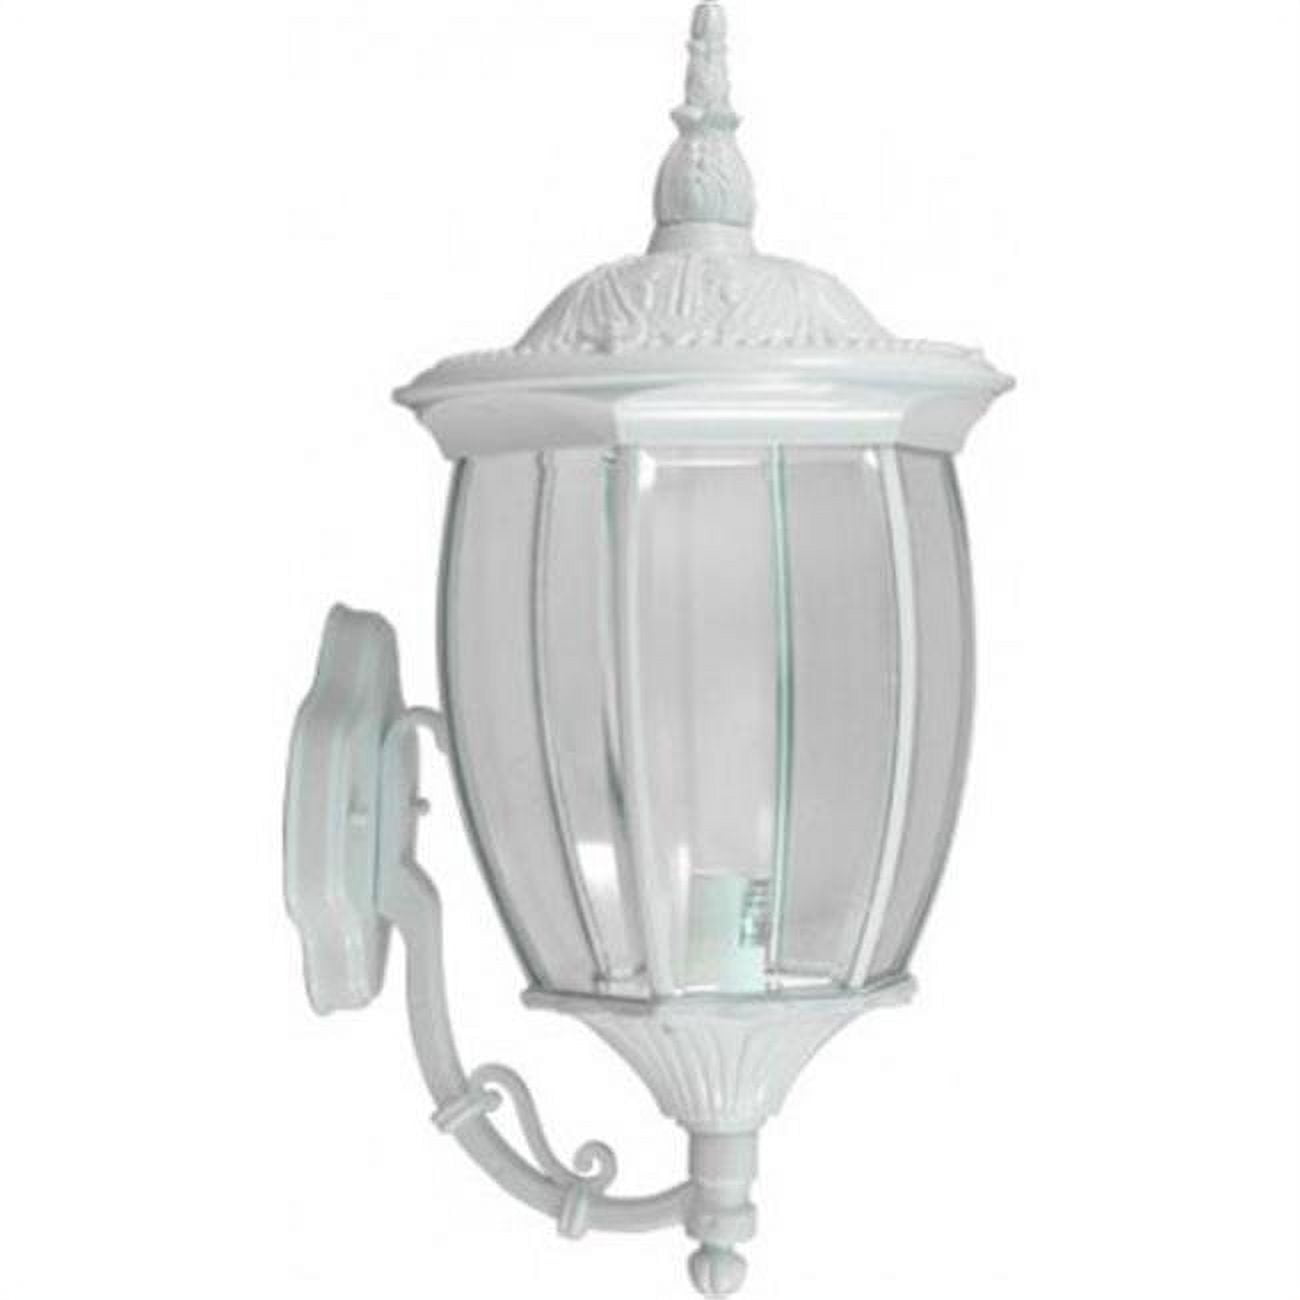 Picture of Dabmar Lighting GM105-13-W 13W & 120V S13-GU24 Victoria Wall Light Fixture - White